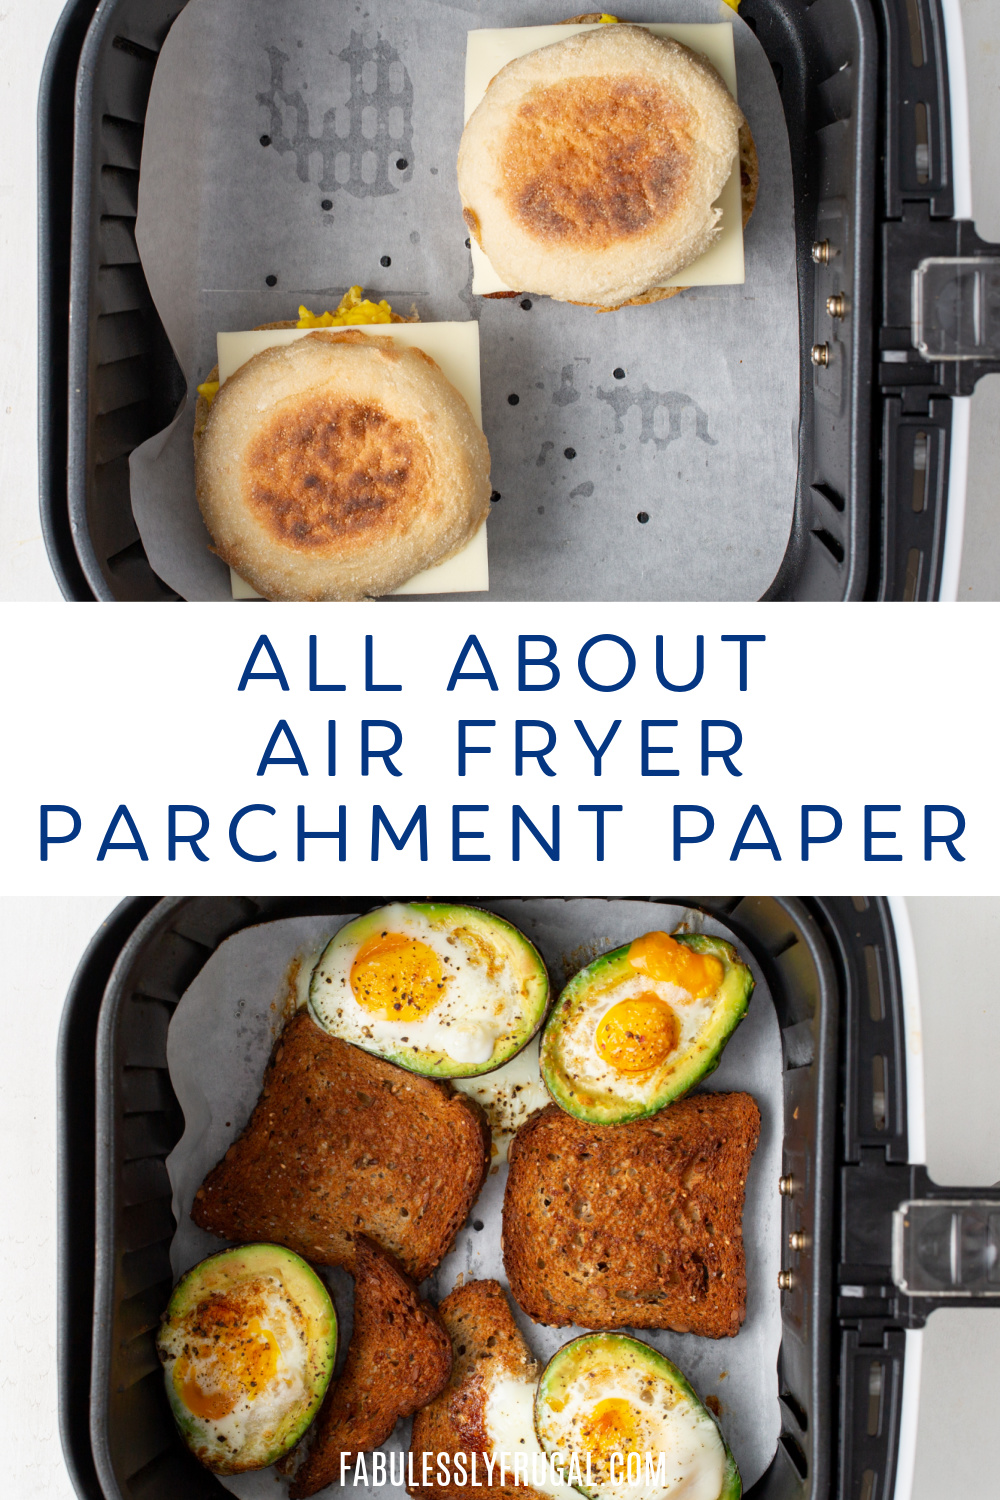 Can You Put Parchment Paper In An Air Fryer? - Keeping the Peas